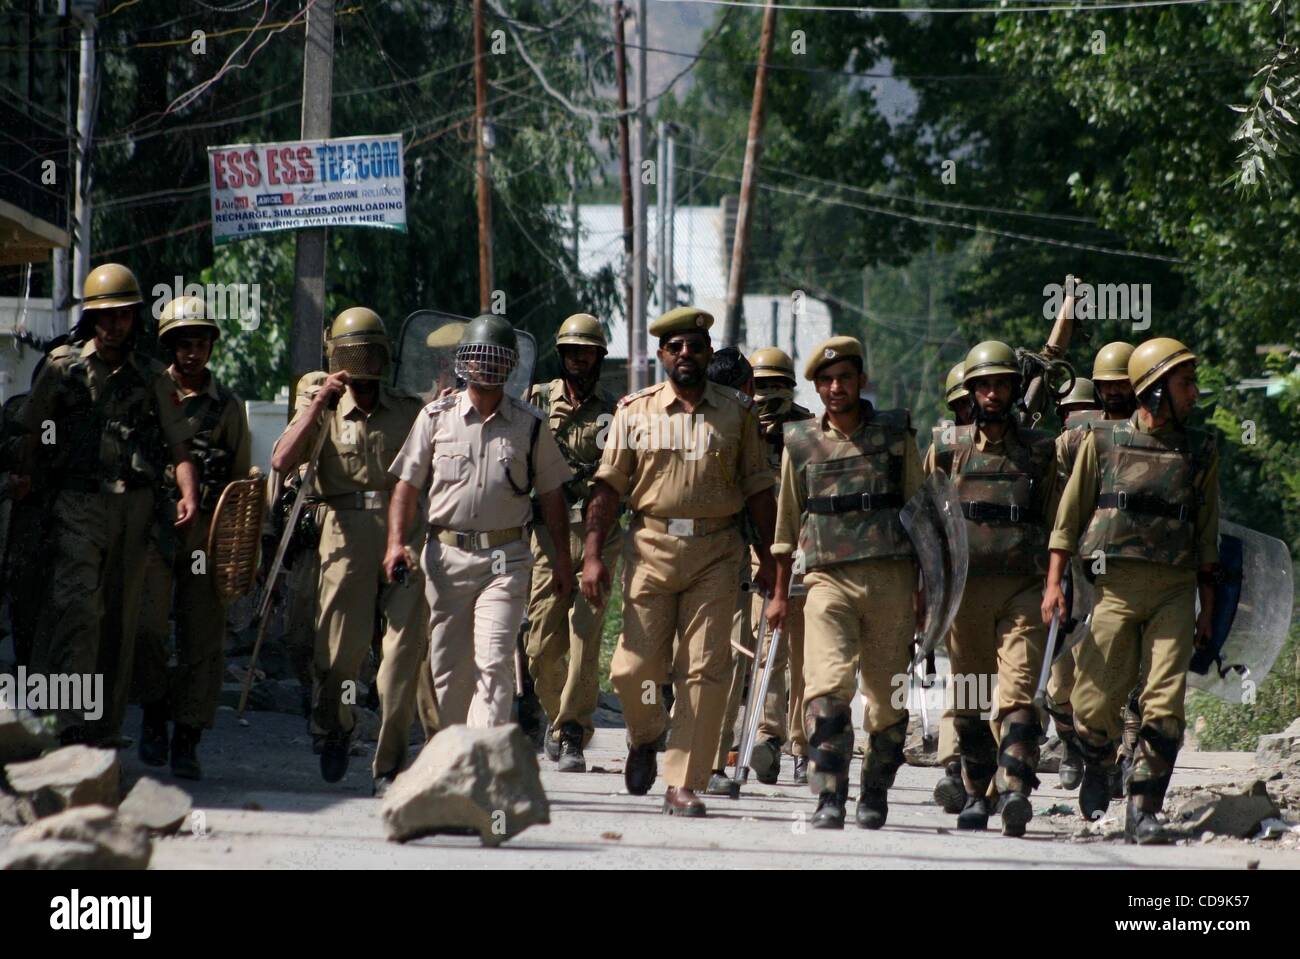 Jul 15, 2010 - Kashmir, Srinagar, India - Indian police petroling during a protest in Srinagar, the summer capital of Indian Kashmir. Kashmir has been rocked by protests and strikes for nearly a month. At least 15 people have died mostly in shootings blamed on police and indian paramilitary soldiers Stock Photo